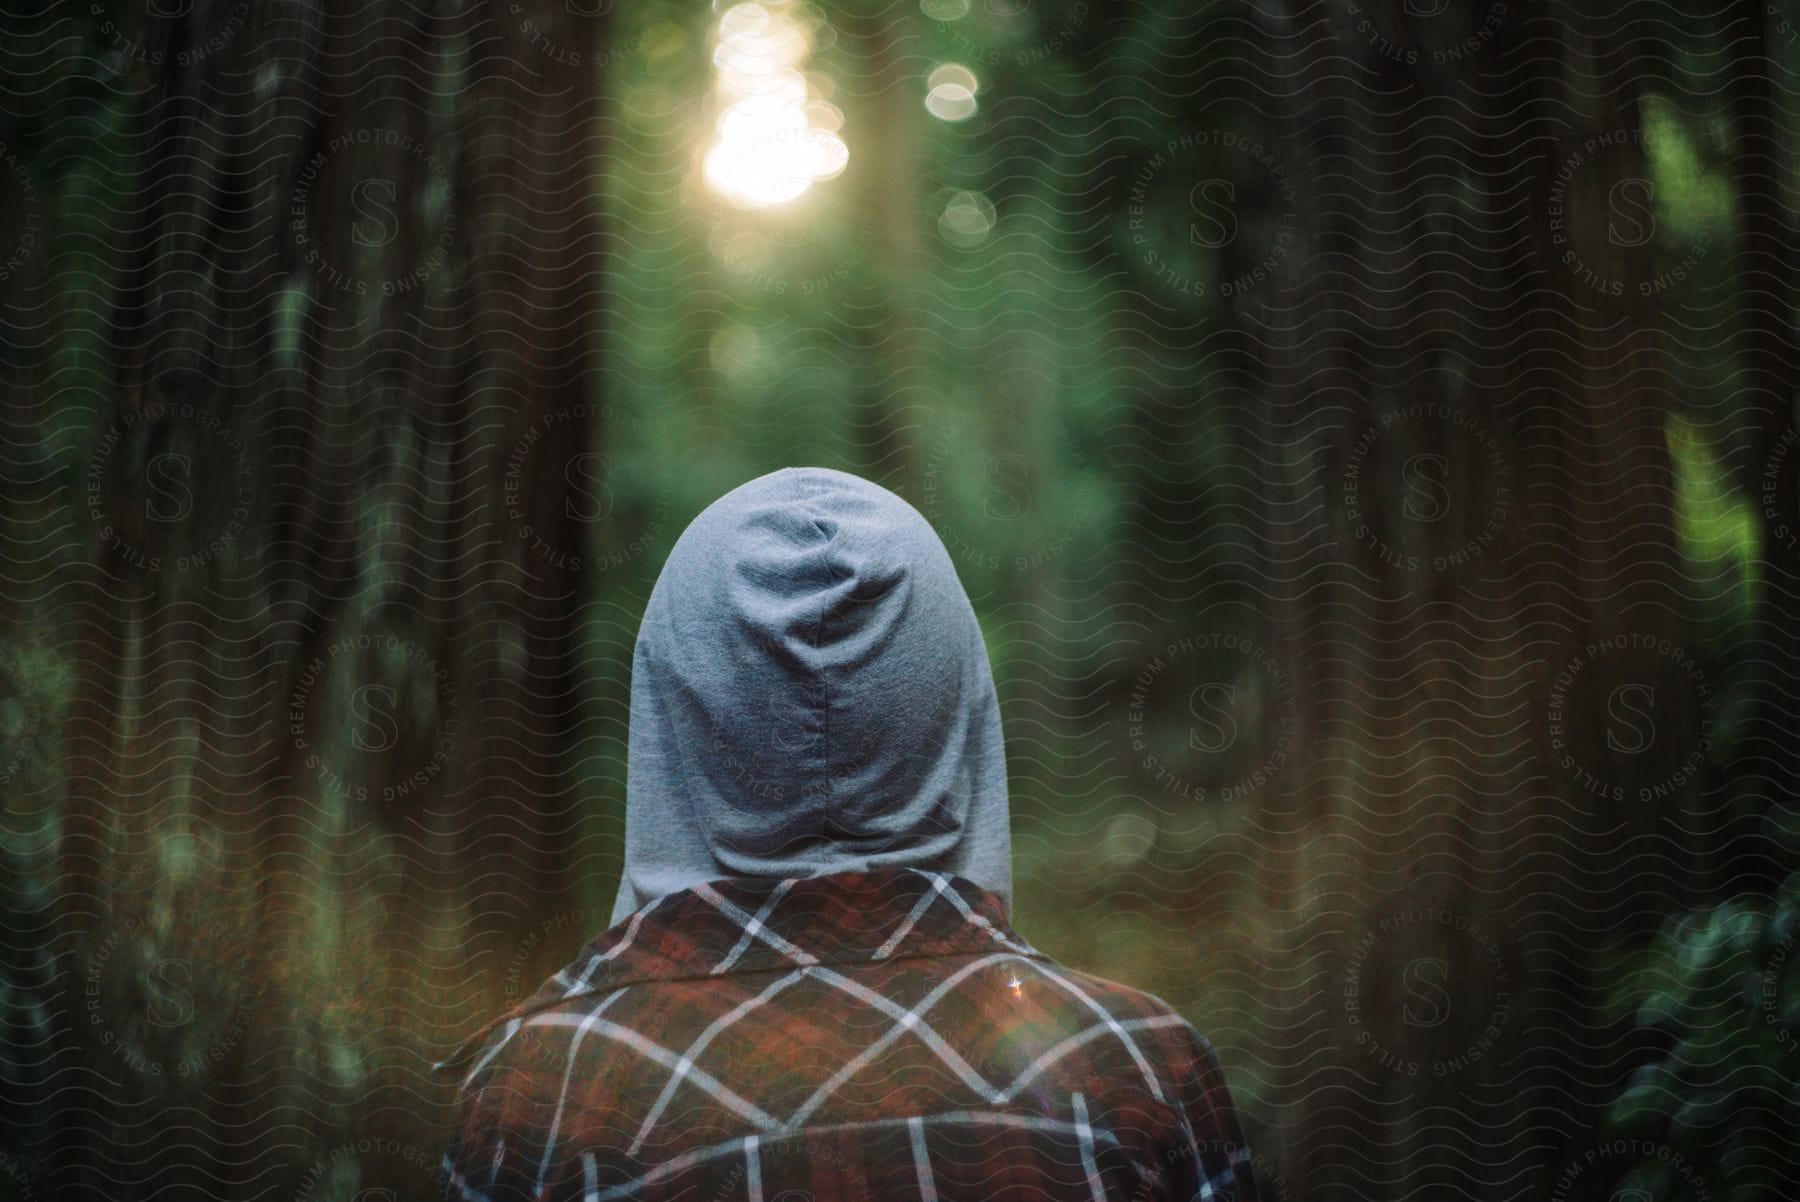 A person in a plaid shirt with a gray hood walks between rows of trees in the forest in late afternoon.